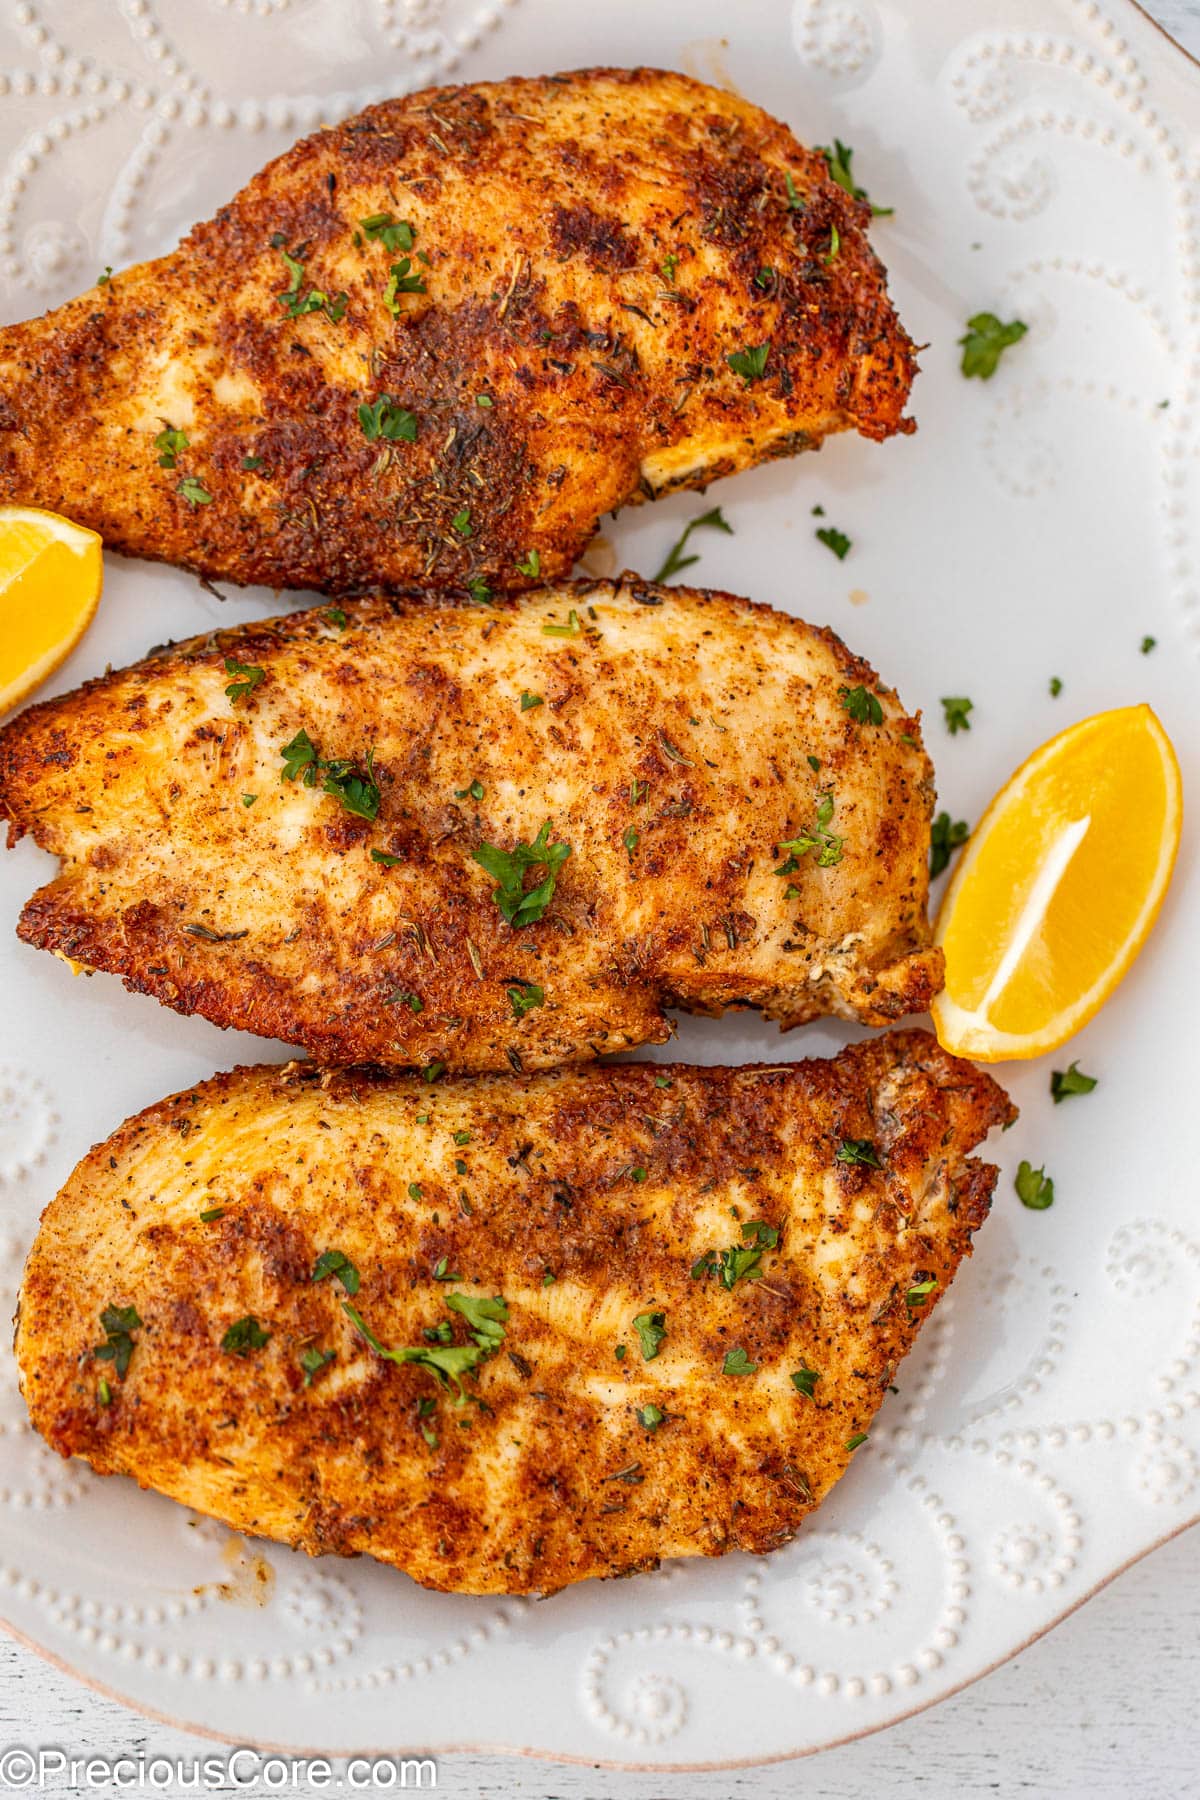 Chicken breasts garnished with parsley.